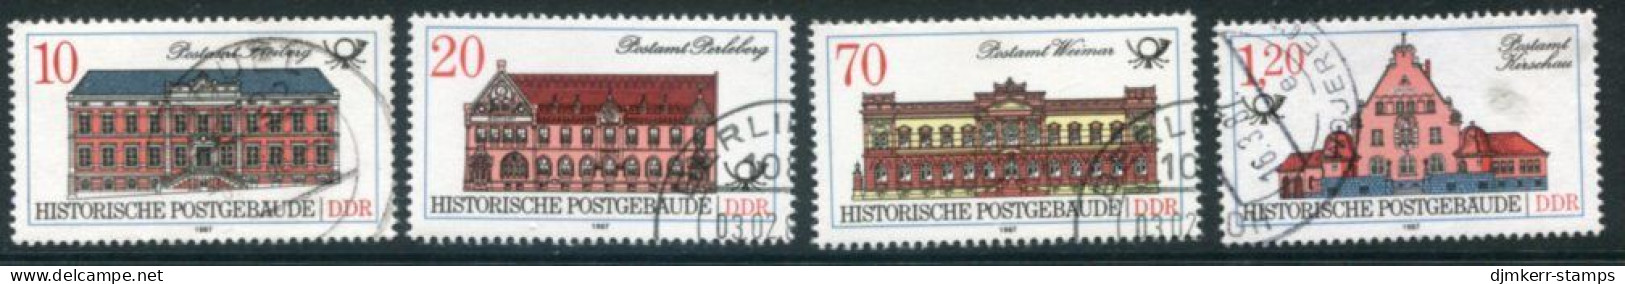 DDR 1987 Historic Postal Buildings Singles Used.  Michel 3067-70 - Used Stamps